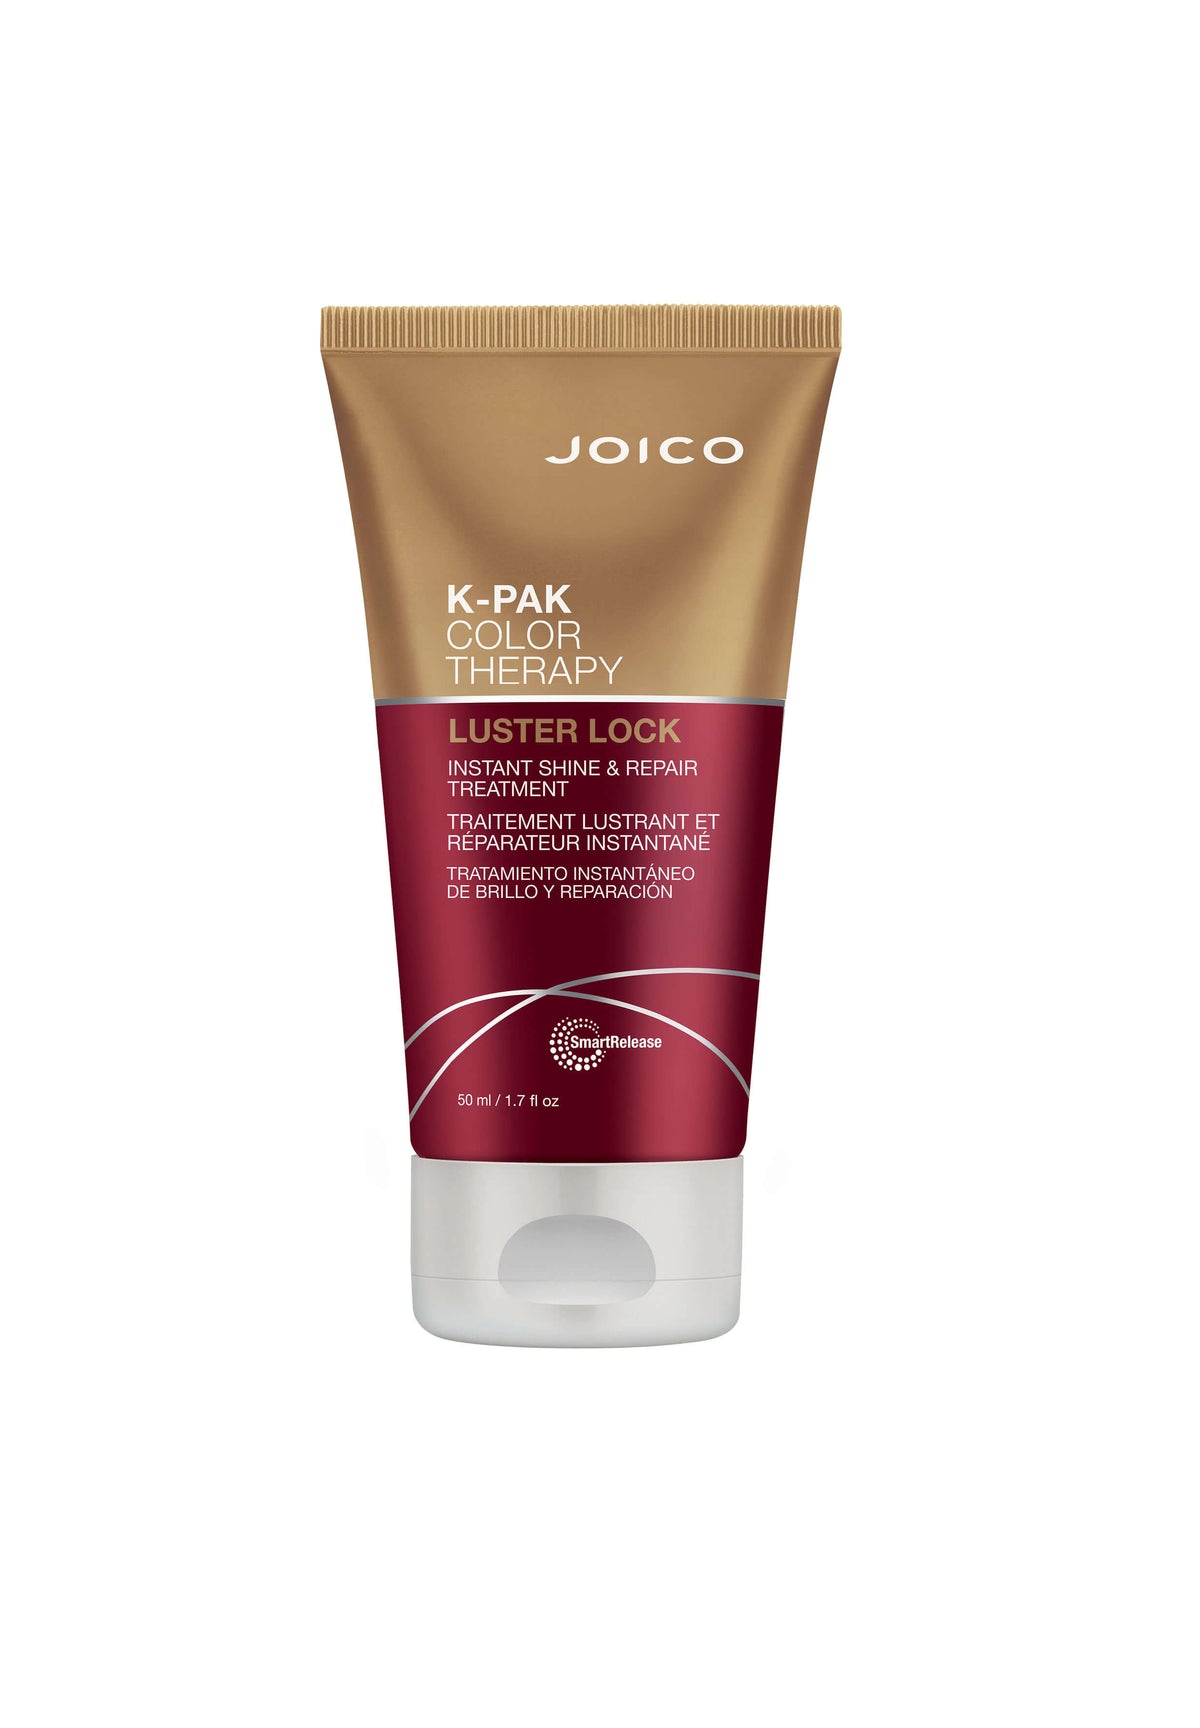 Joico K-Pak Color Therapy Luster Lock Instant Shine & Repair Treatment Haarkur 50 ml